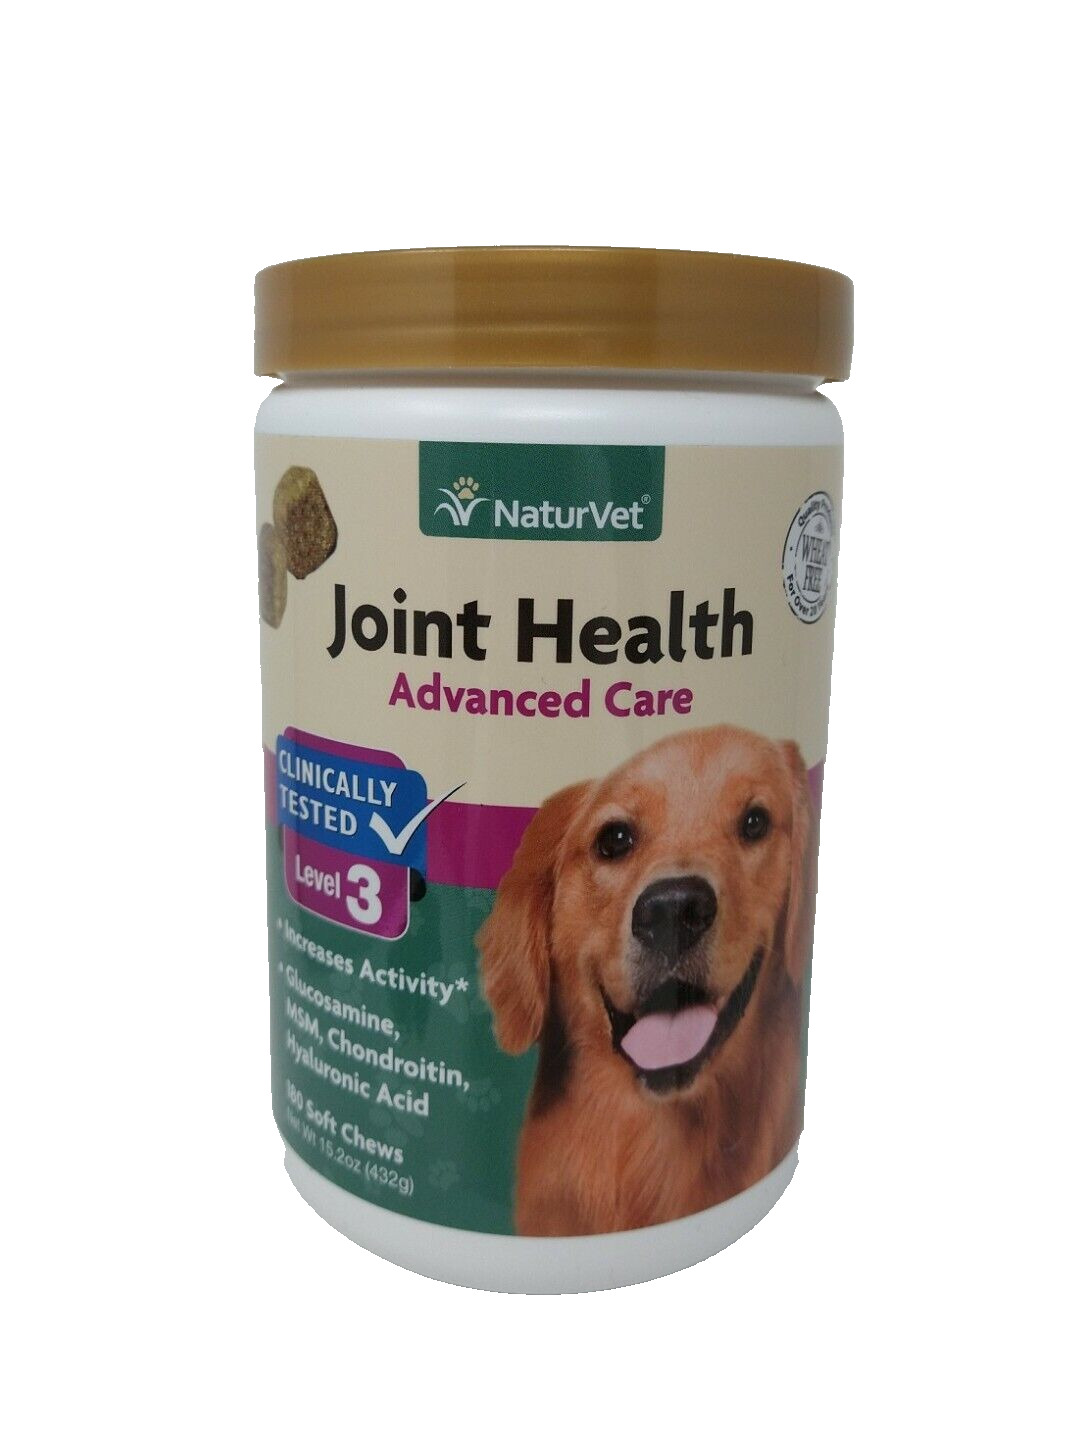 NaturVet Joint Health Level 3 Advanced Care for Dogs 180 Chews. Exp 12/24+ #4647